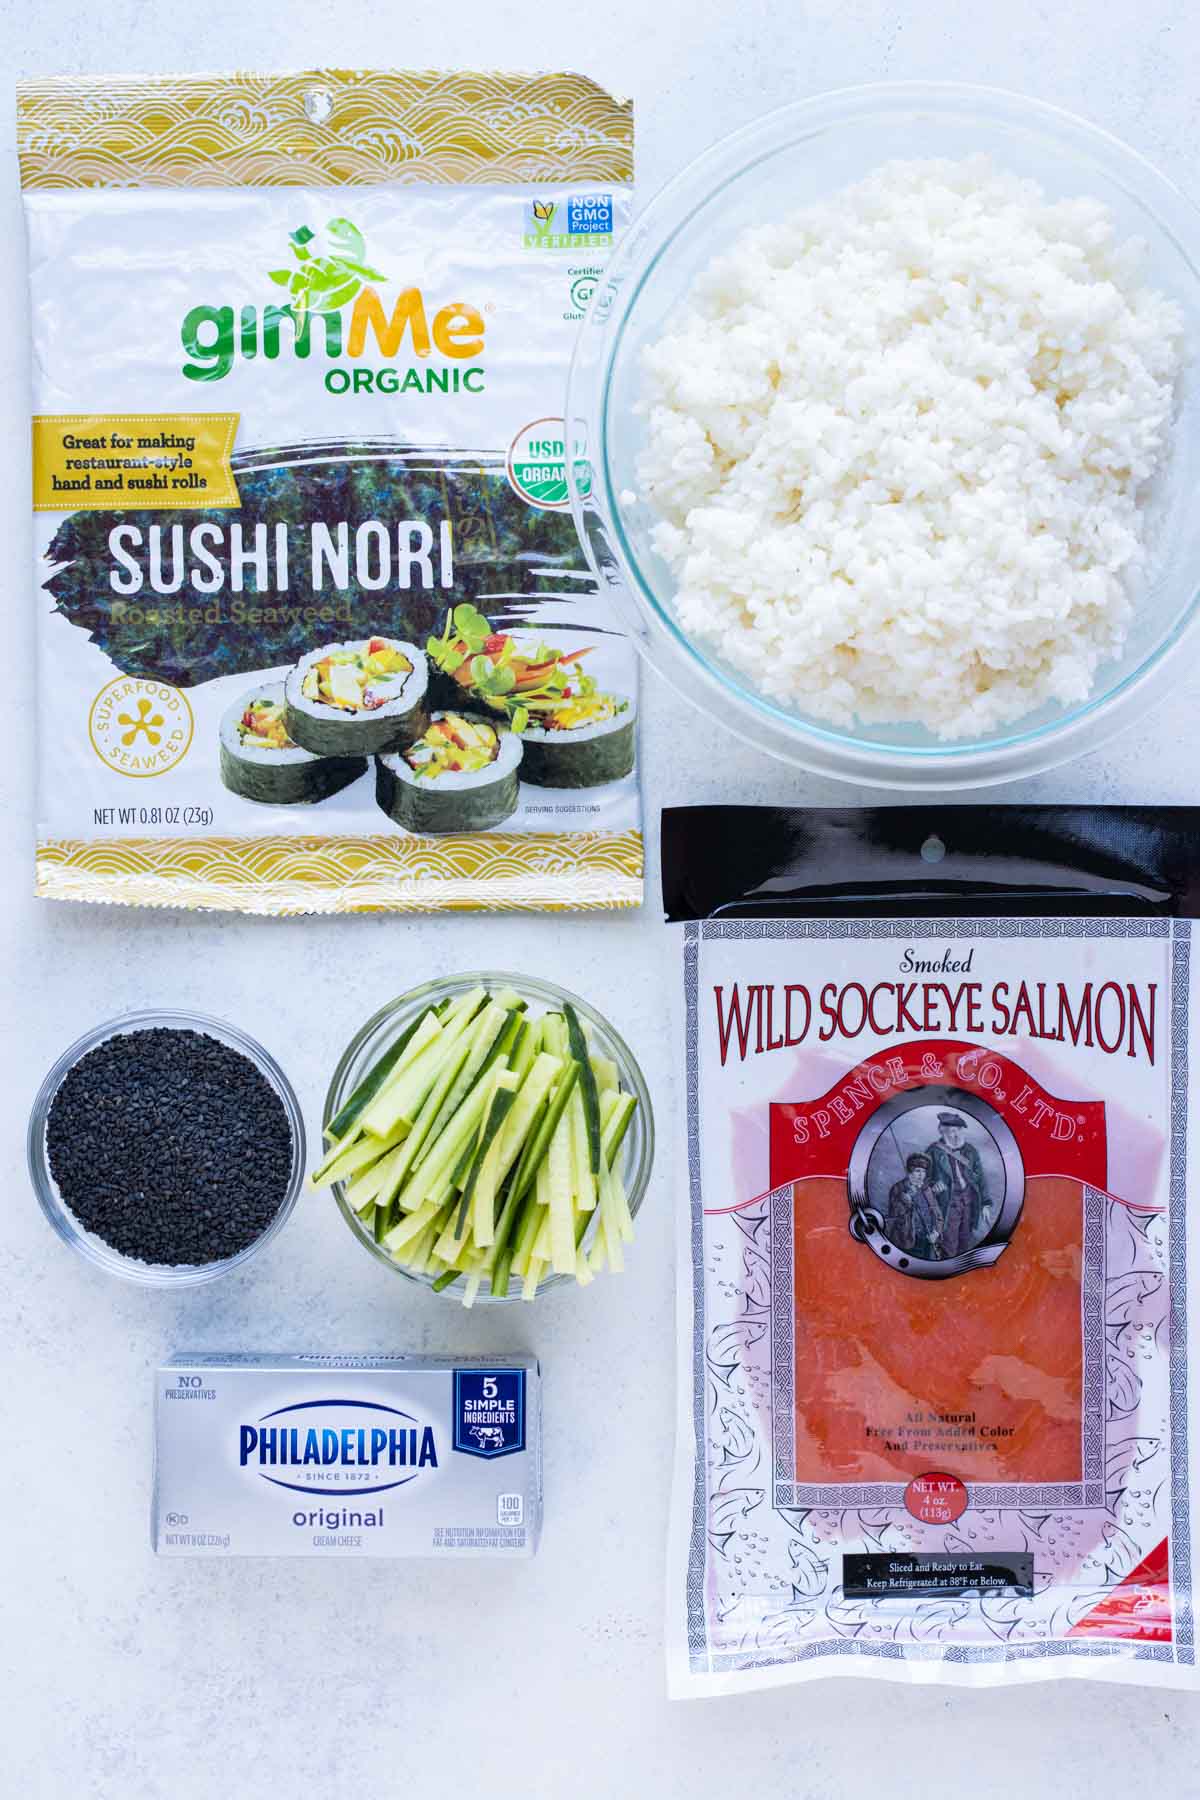 Smoked salmon, rice, nori seaweed, cucumber, cream cheese, sesame seeds are the ingredients for this recipe.